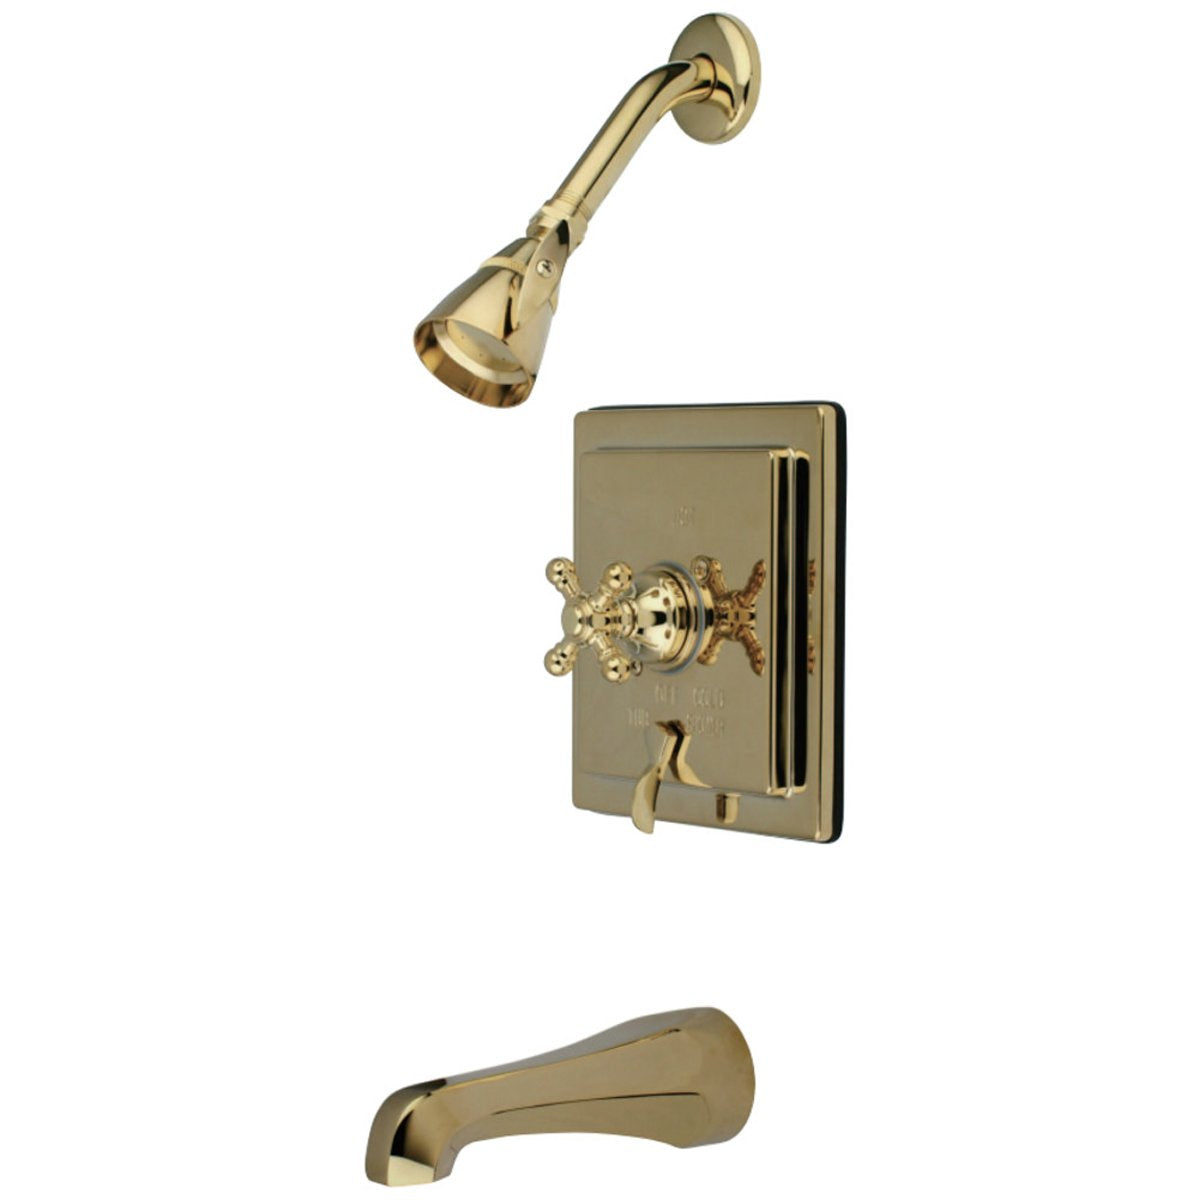 Kingston Brass English Vintage Tub and Shower Faucet with Diverter